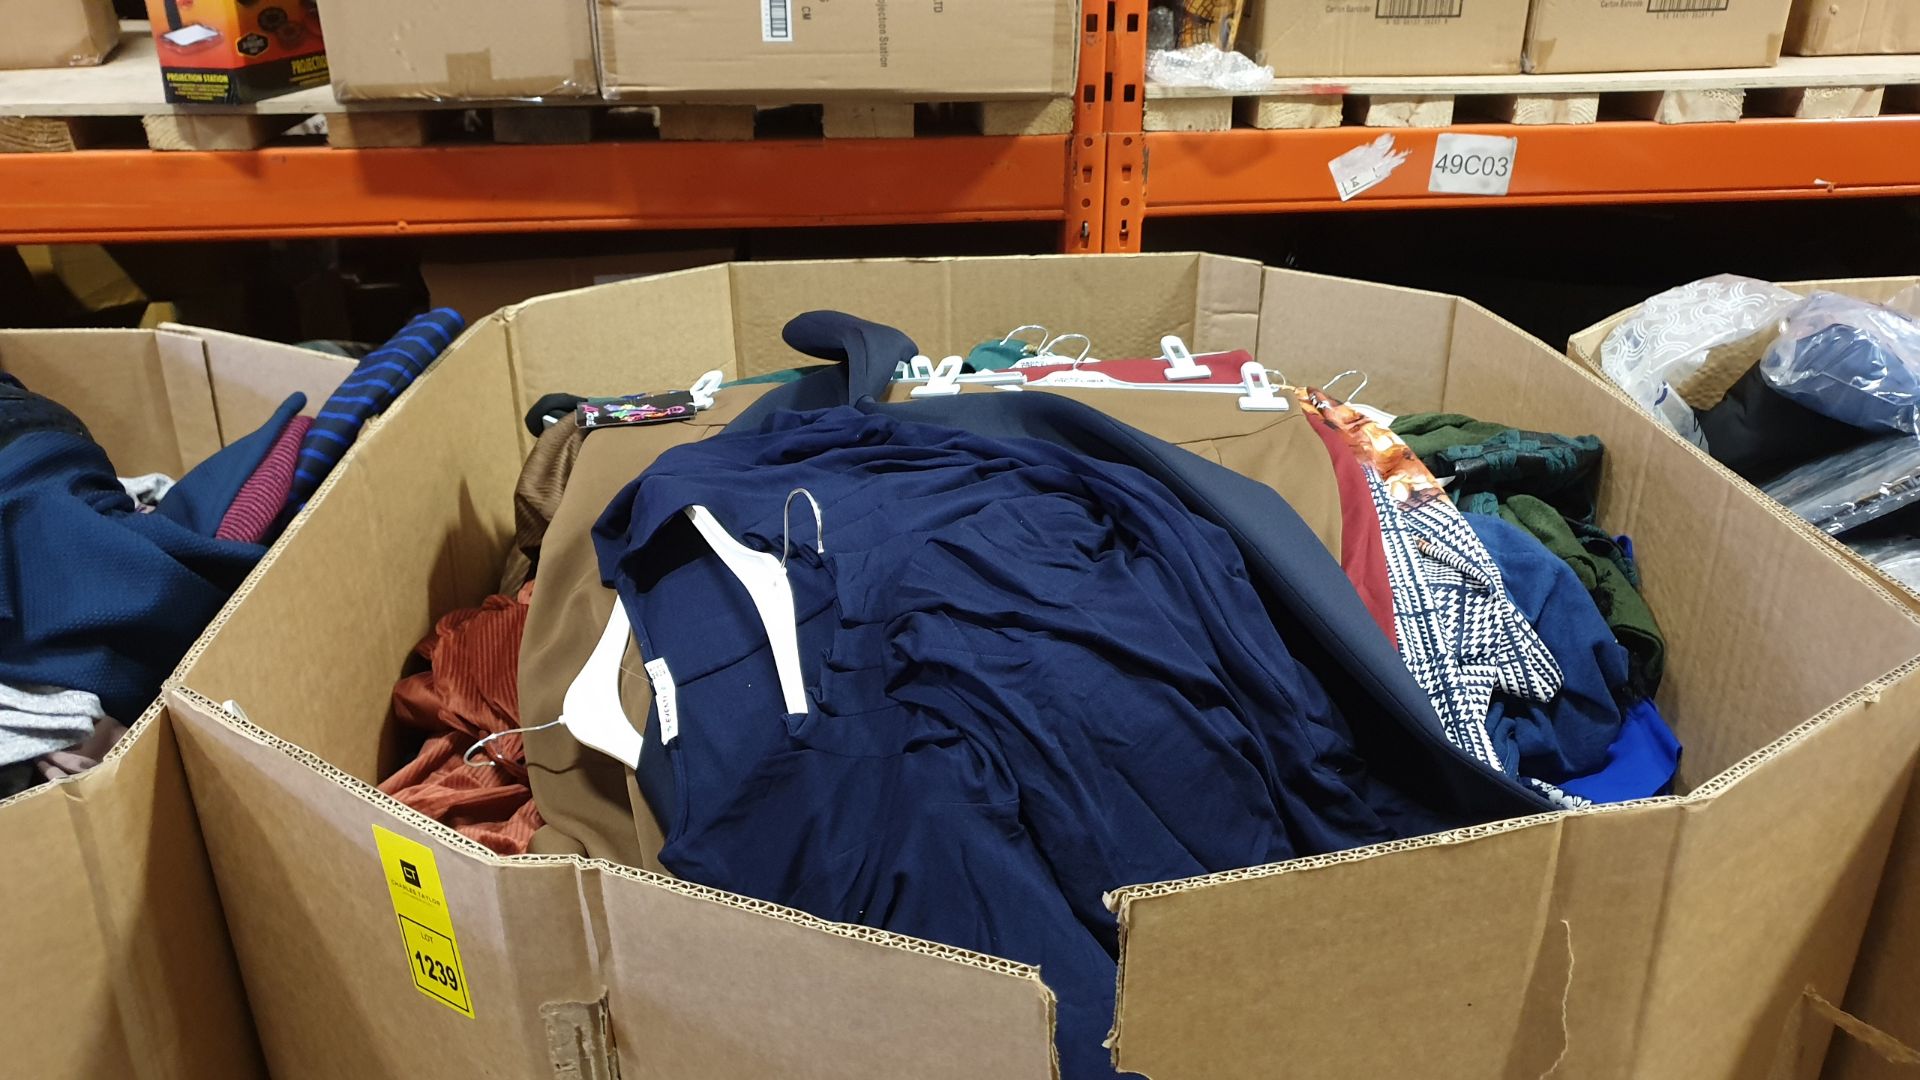 FULL PALLET OF CLOTHING IE EVENTI DRESSES, GDG ACTUEL SKIRTS, GDG ACTUEL JACKETS, AND VARIOUS